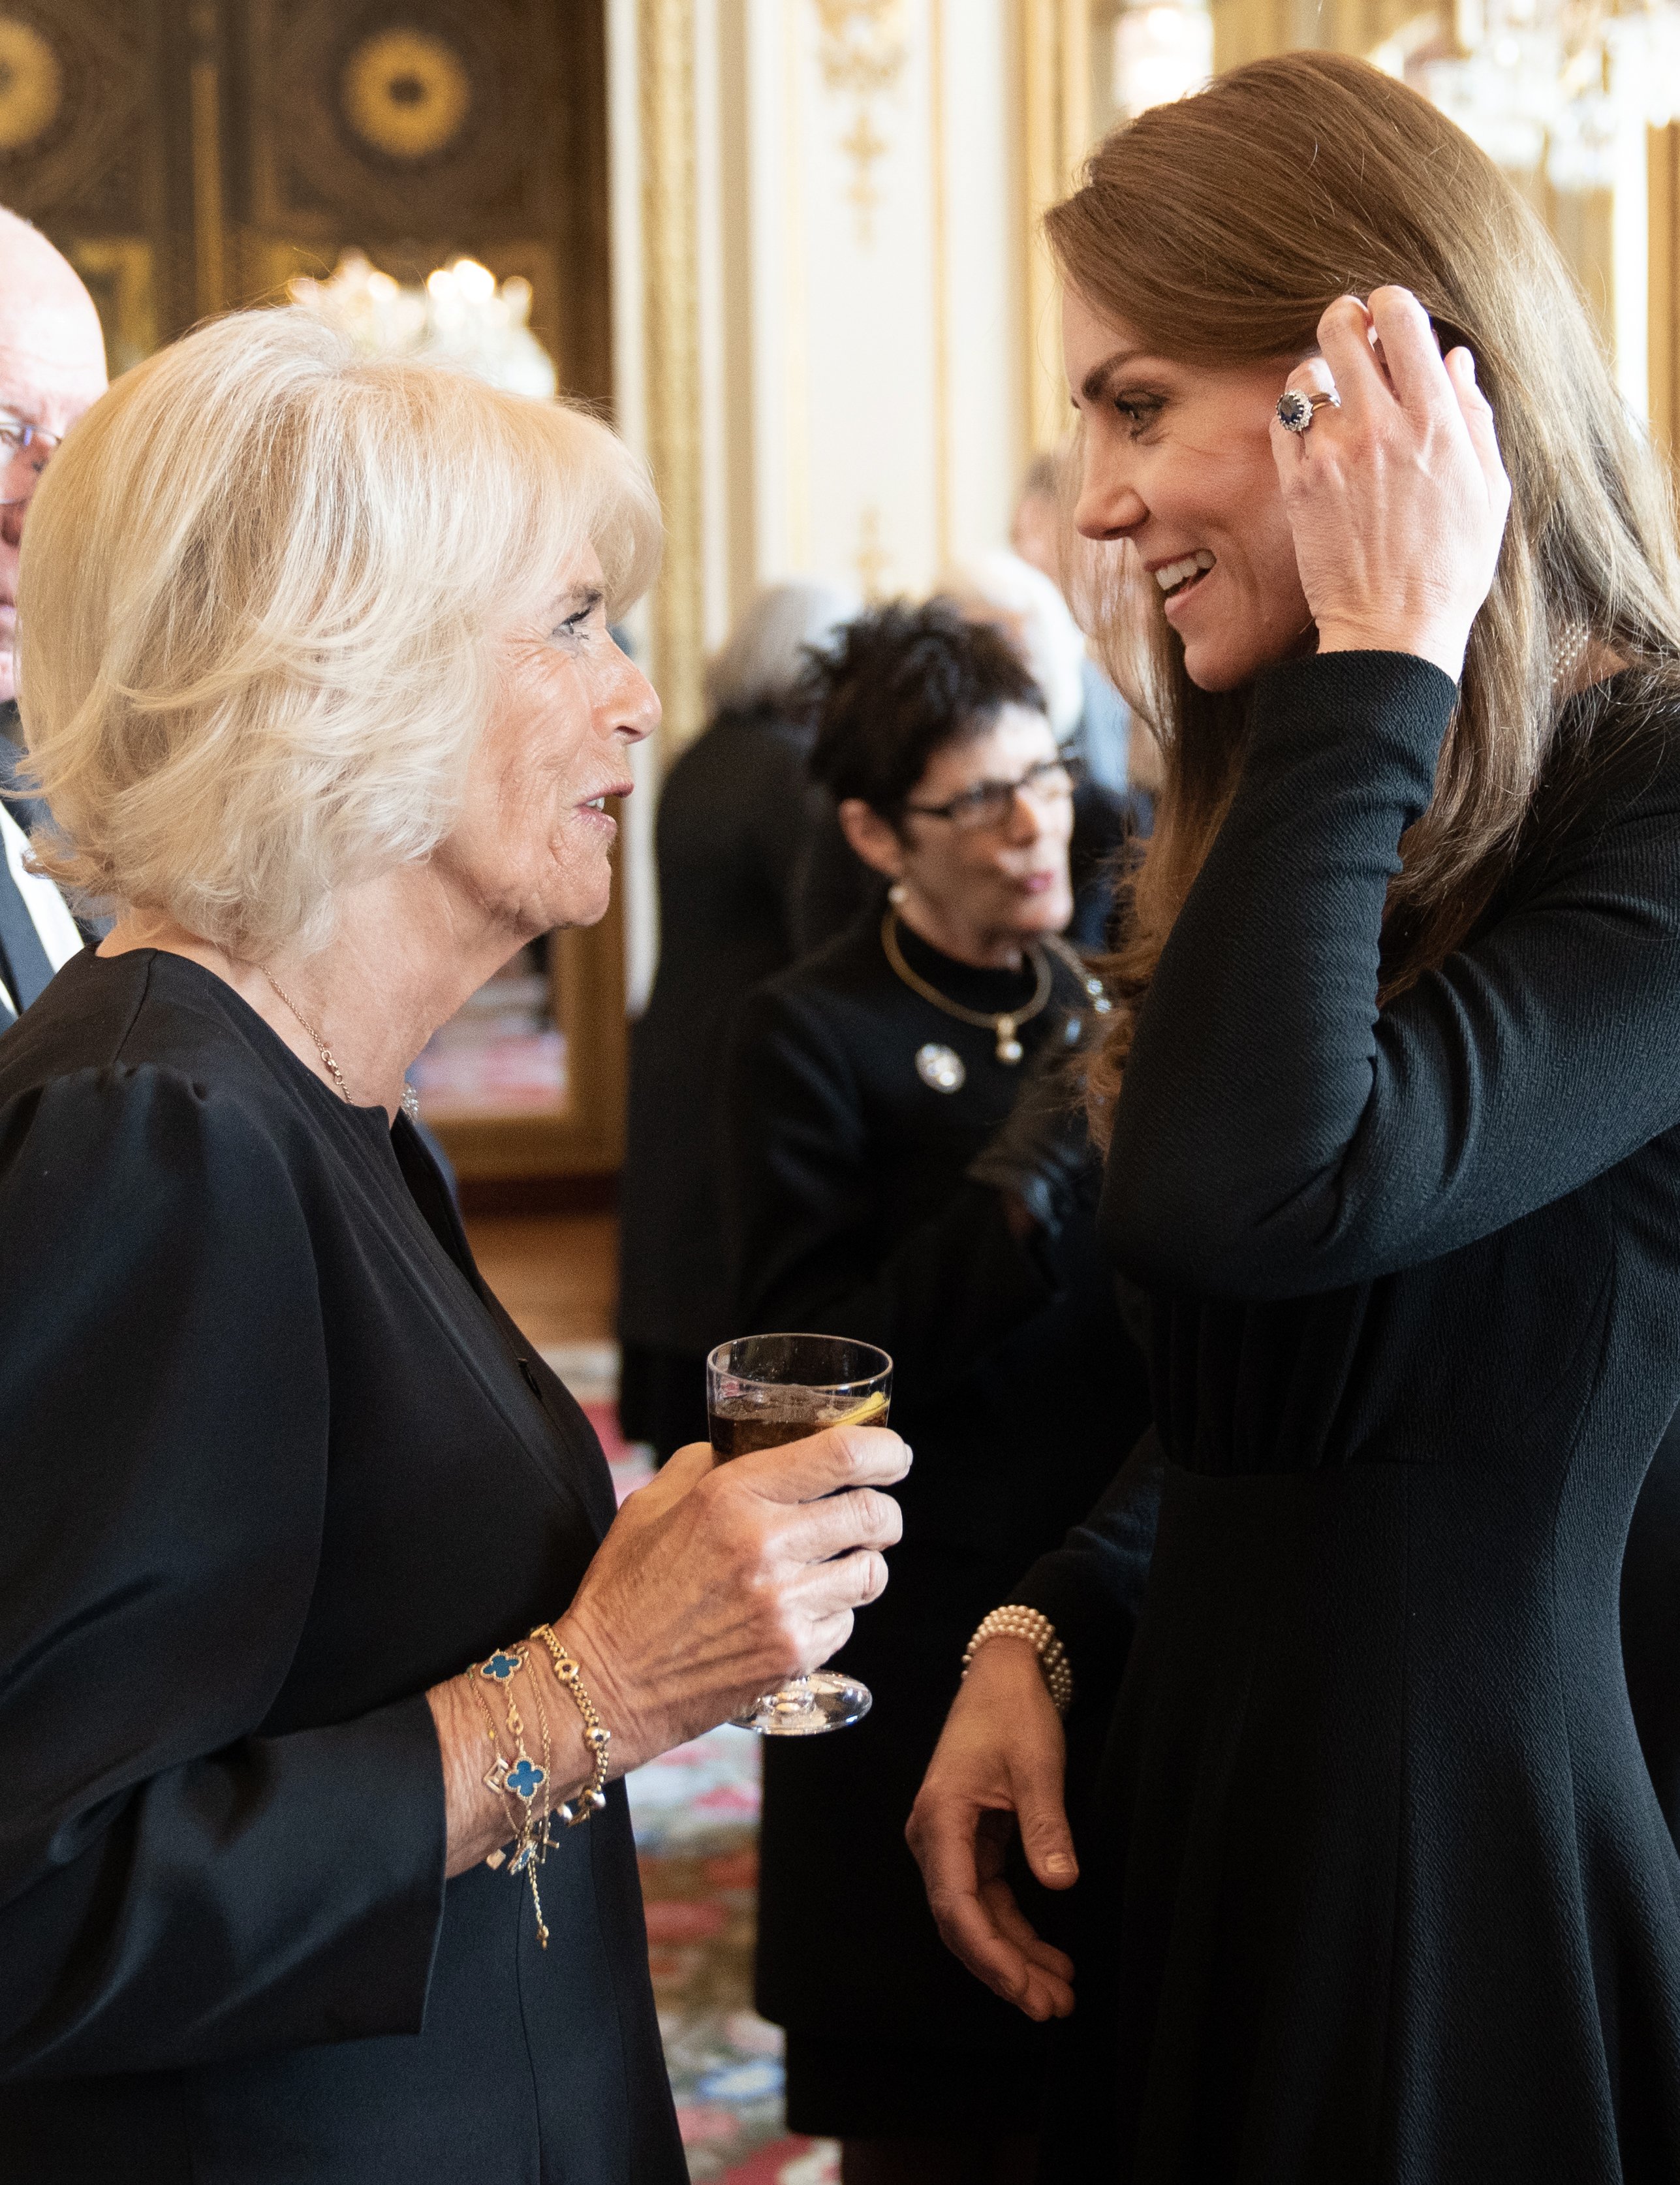 Camilla, Queen Consort and Catherine, Princess of Wales at a lunch held for governors-general of the Commonwealth nations at Buckingham Palace on September 17, 2022 in London, England. | Source: Getty Images